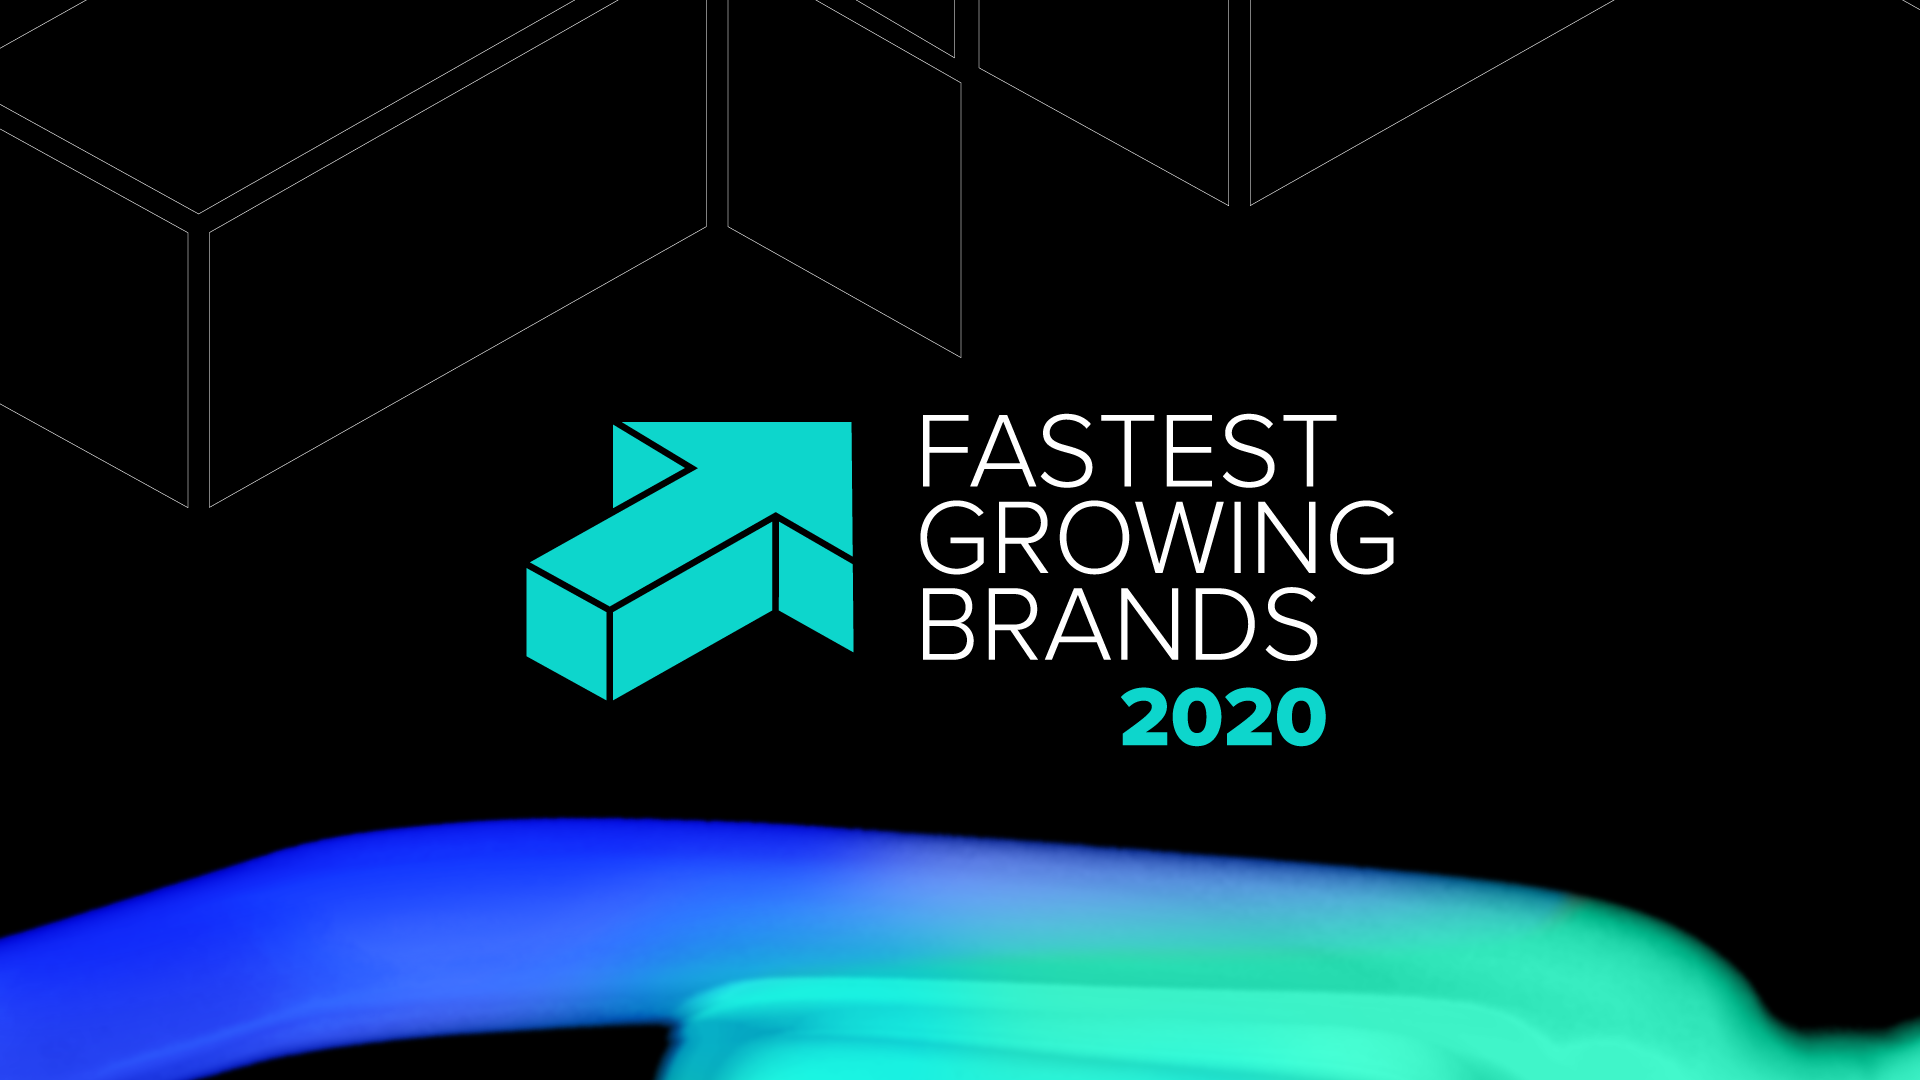 Download the Fastest Growing Brands Report 2020